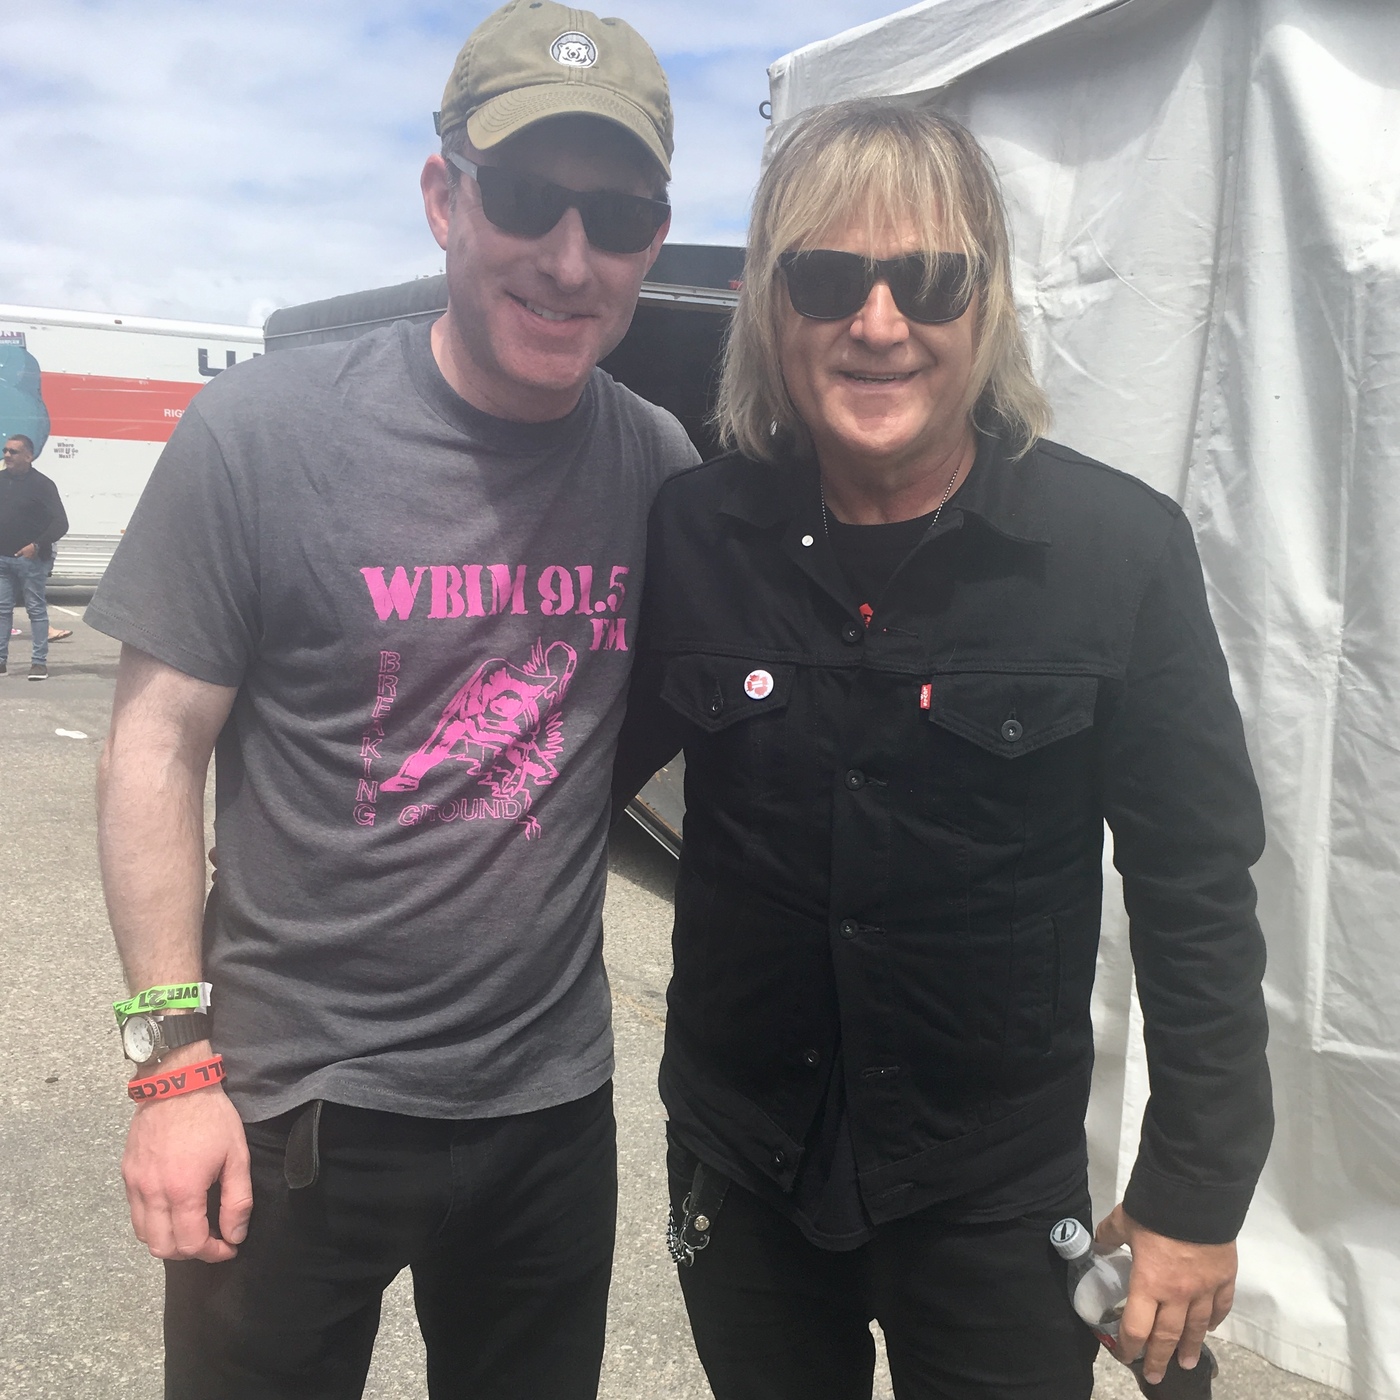 Episode 59: The Alternative: Interview with The Alarm’s Mike Peters (03.15.21)